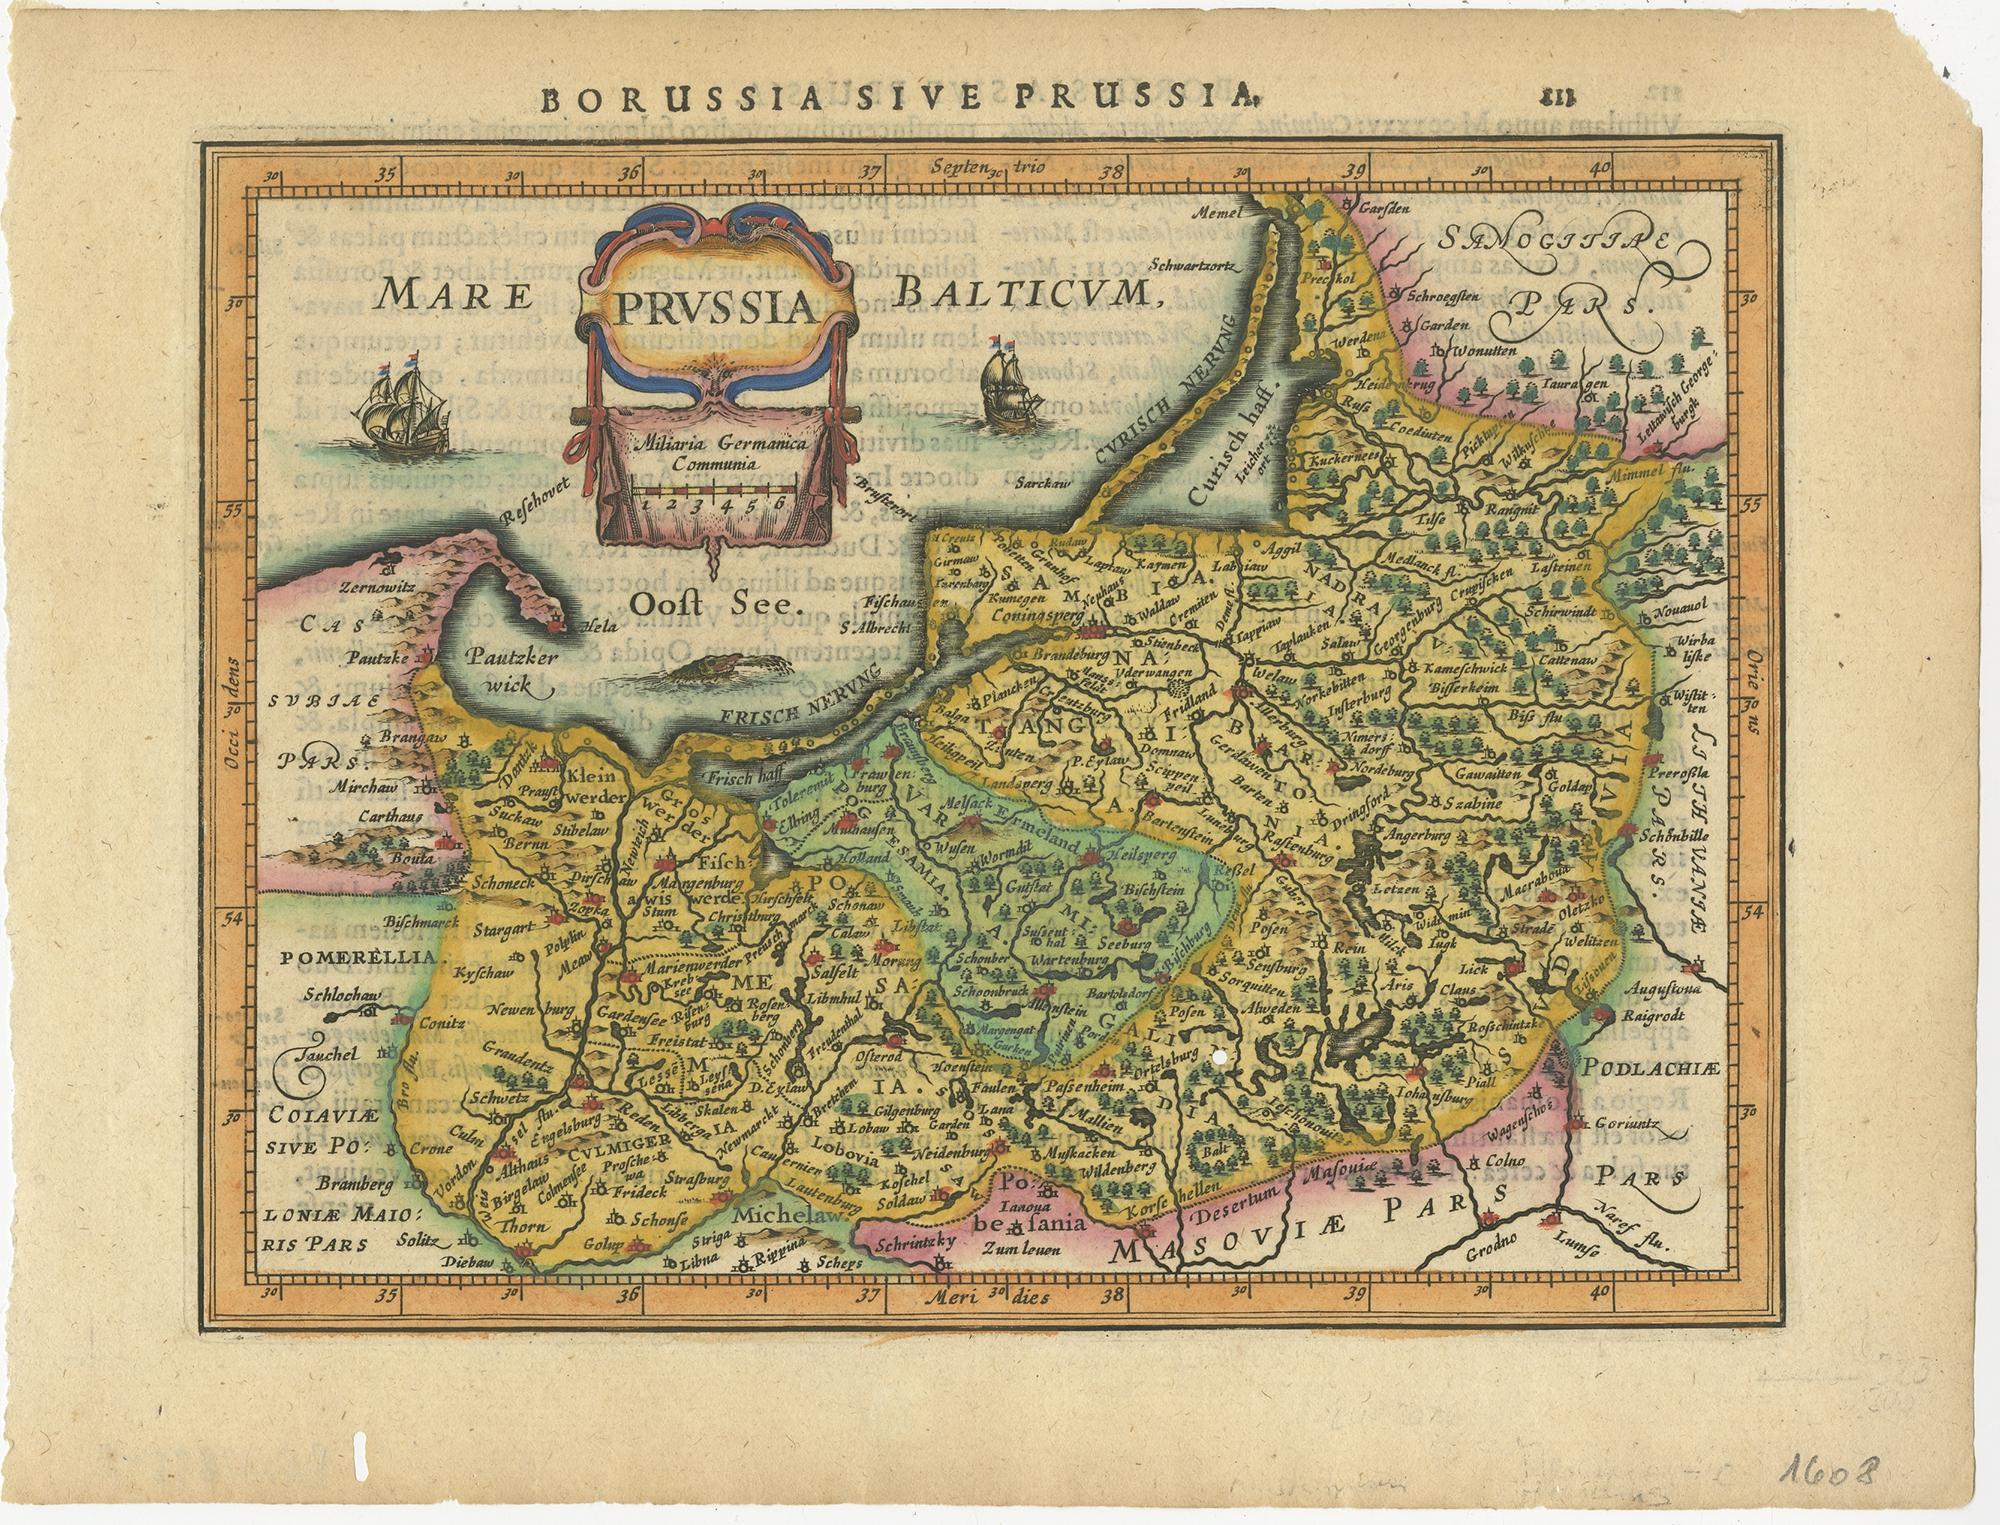 Antique map titled 'Prussia'. Original antique map of Prussia, a historically prominent German state that originated in 1525 with a duchy centered on the region of Prussia on the southeast coast of the Baltic Sea. This map originates from 'Atlas